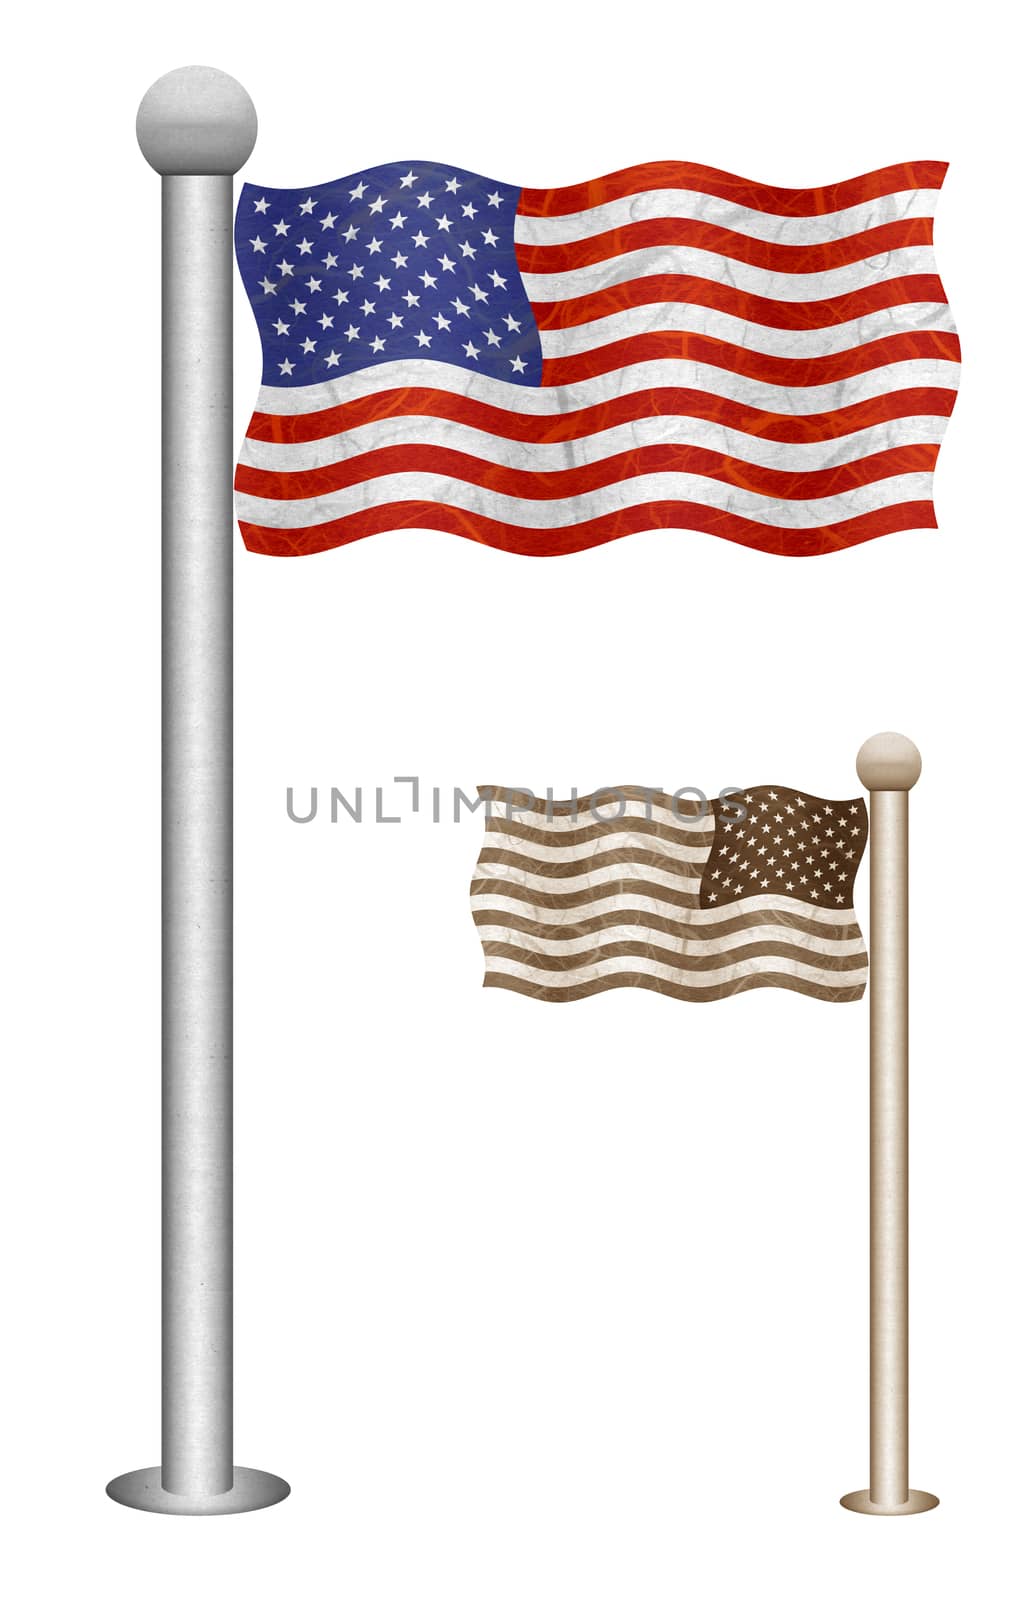 United States of America flag waving on the wind. Flags of countries in North America. Mulberry paper on white background.